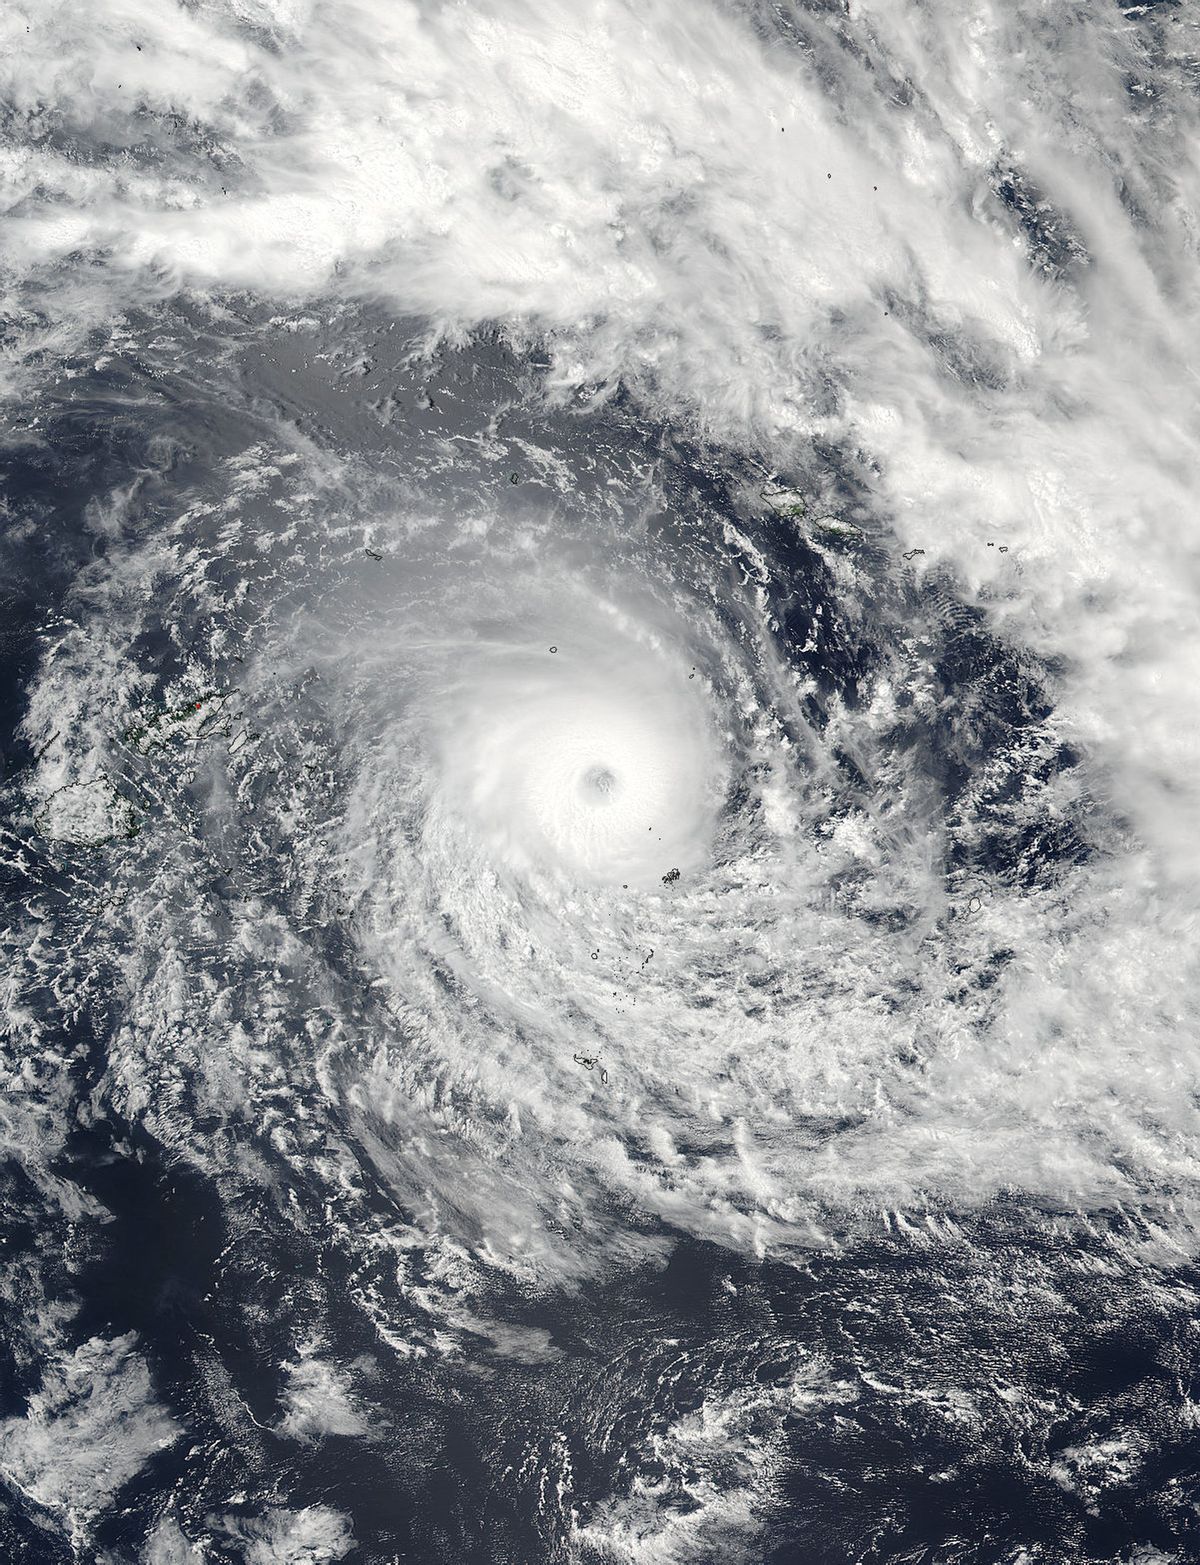 This Feb. 19, 2016, satellite image released by NASA Goddard Rapid Response shows Cyclone Winston in the South Pacific Ocean. The Pacific island nation of Fiji was hunkering down Saturday as a formidable cyclone with winds of 300 kilometers (186 miles) per hour bore down. (NASA Goddard Rapid Response/NOAA via AP) (AP)